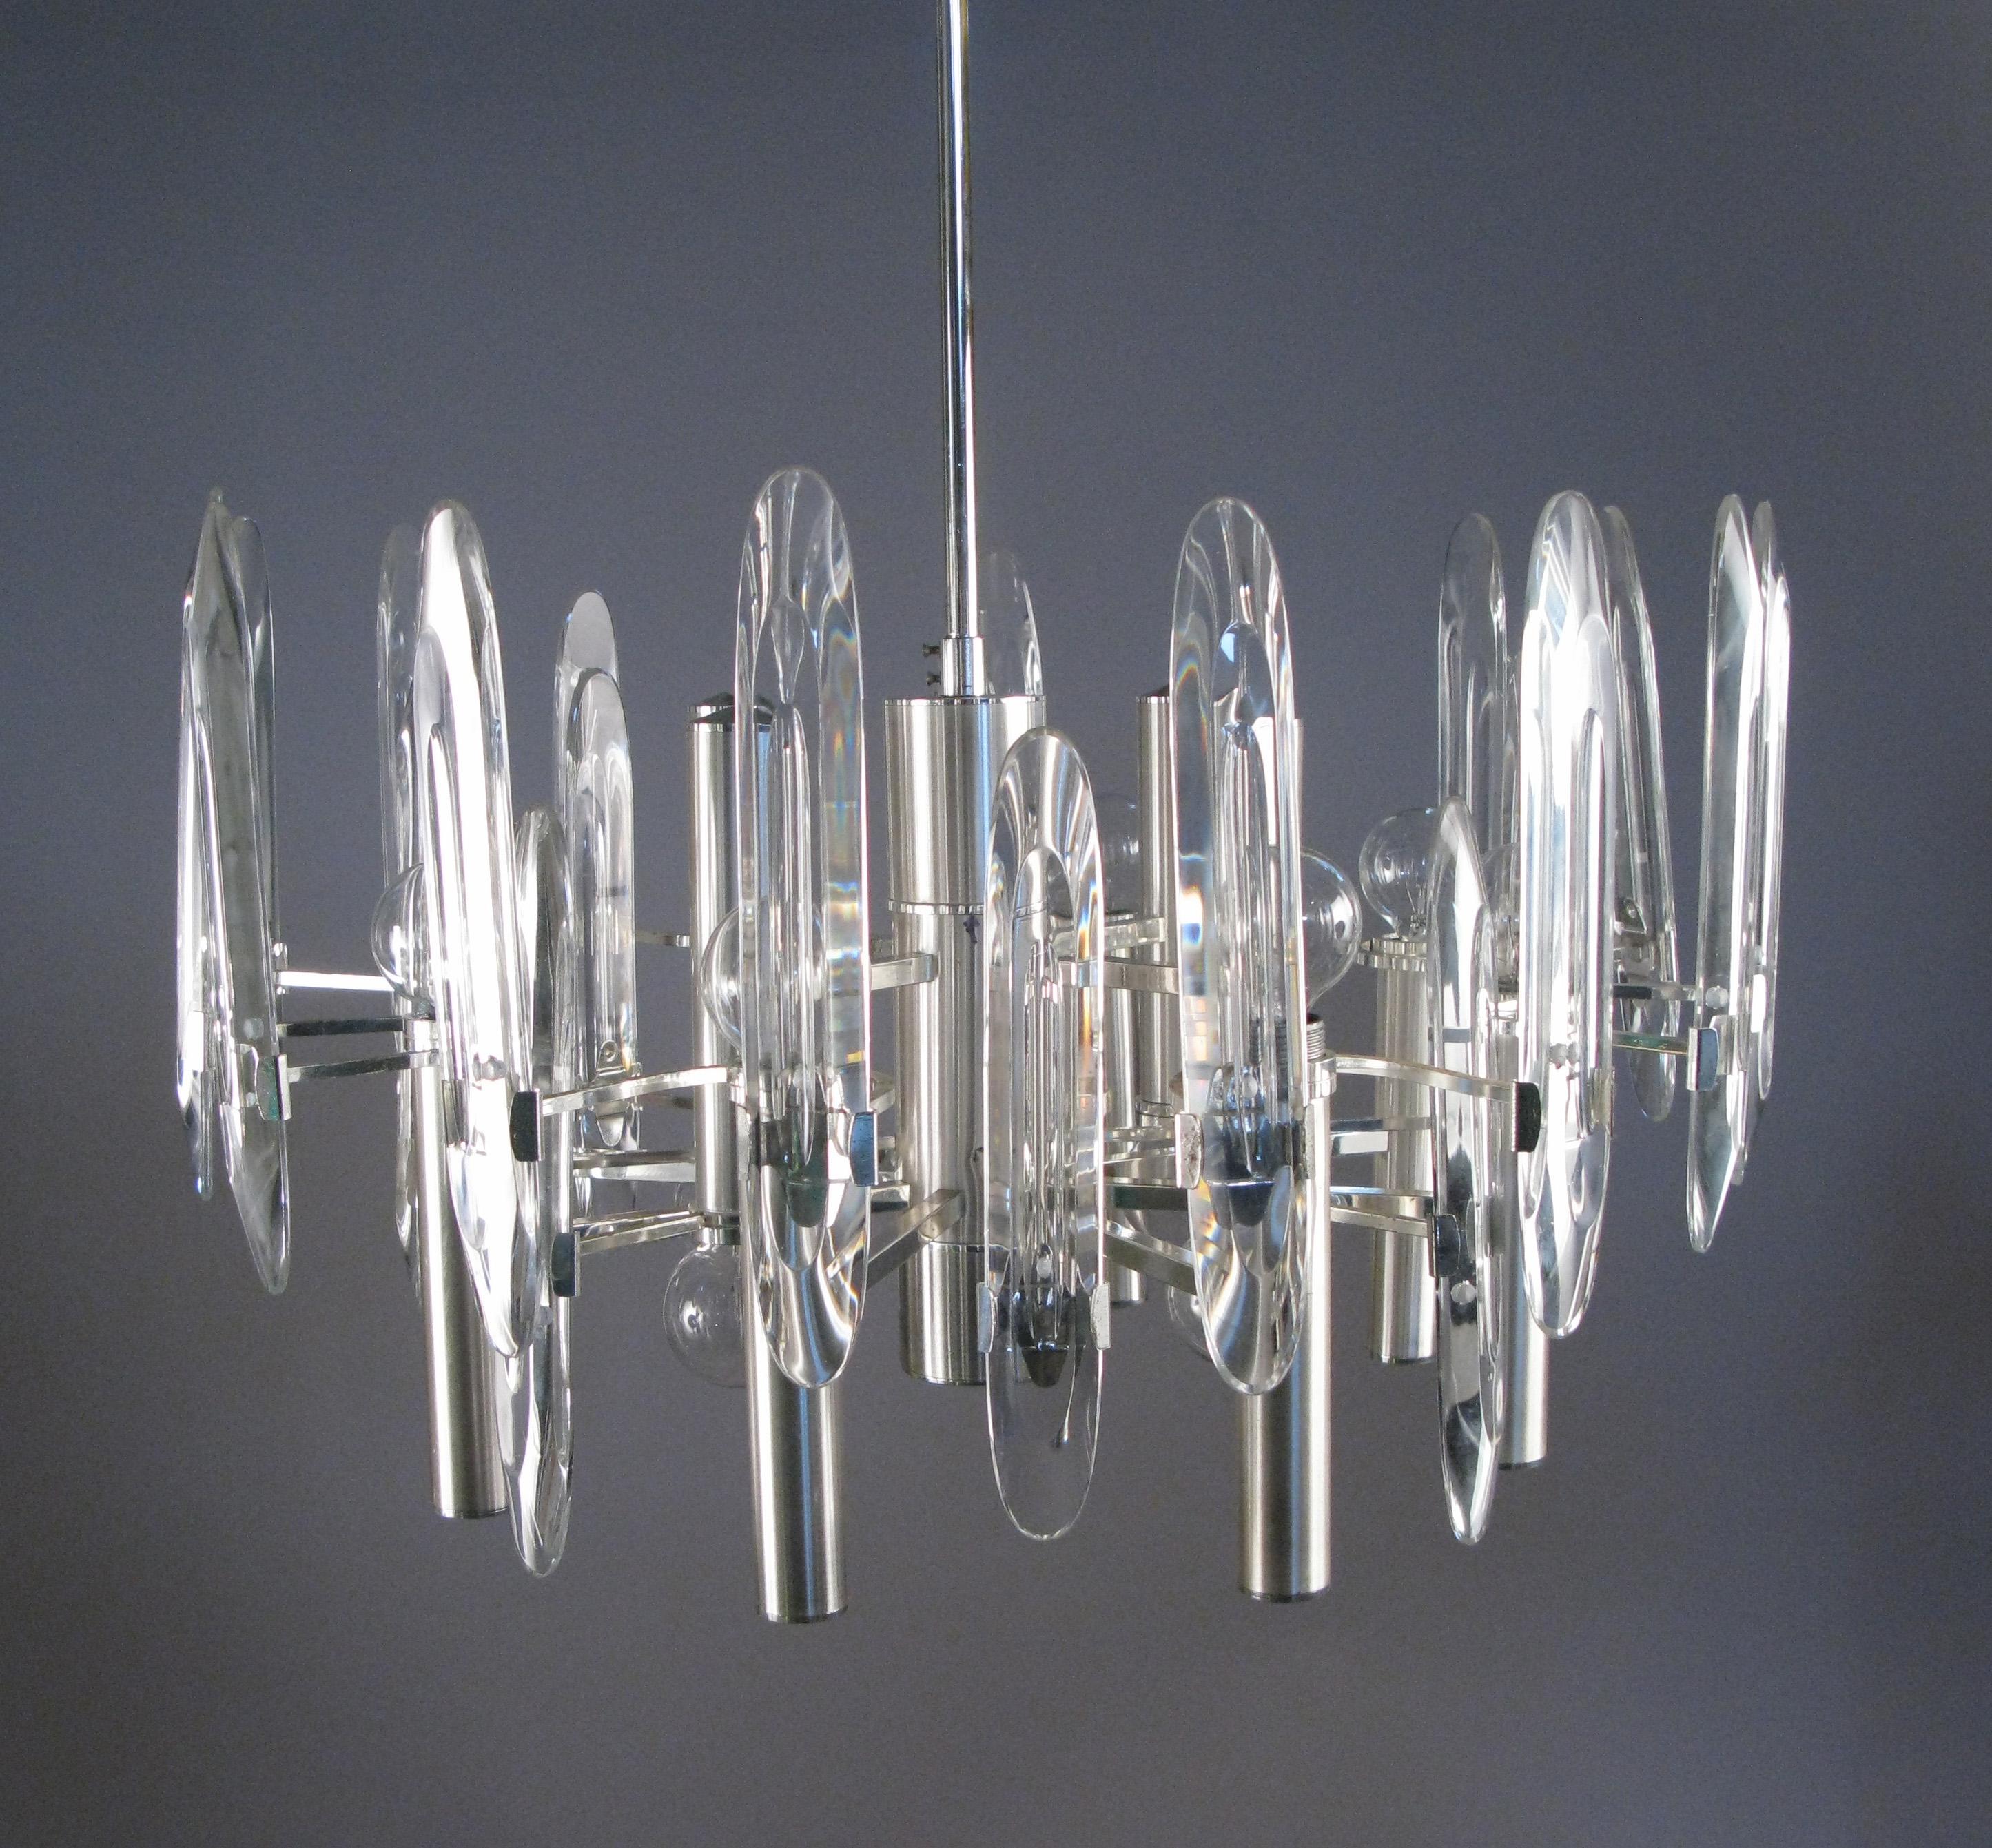 A beautiful and stunning vintage 1960s Italian chandelier by Gaetano Sciolari, with a chrome and brushed aluminum frame, and tall glass panels. The fixture has twelve sockets, allowing for a wide range of light. This is one of Sciolari's most